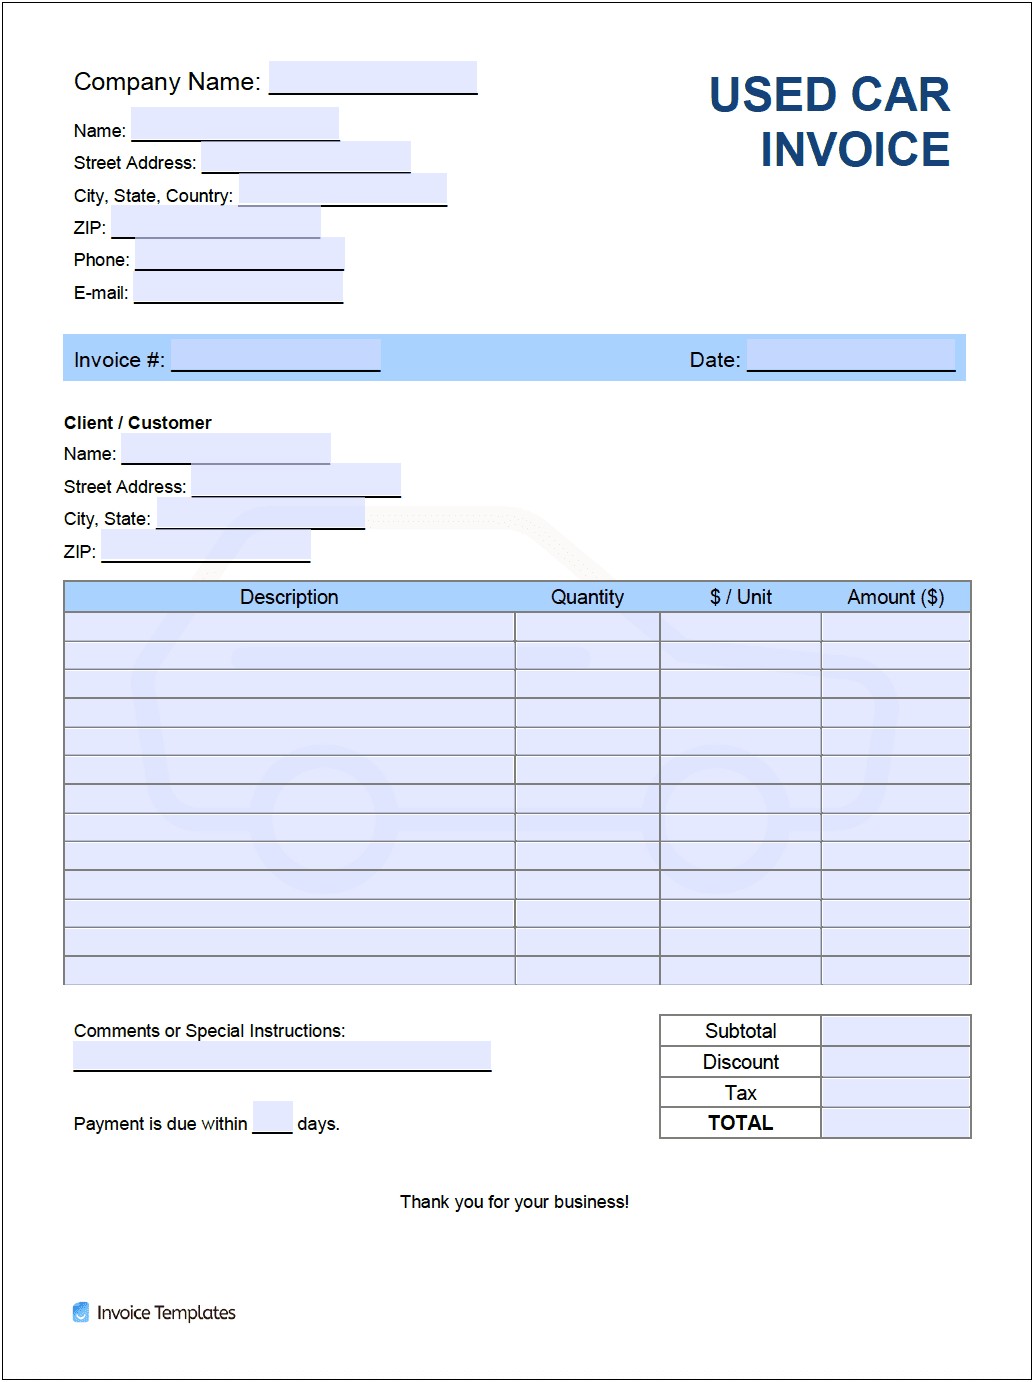 Used Car Bill Of Sale Template Word